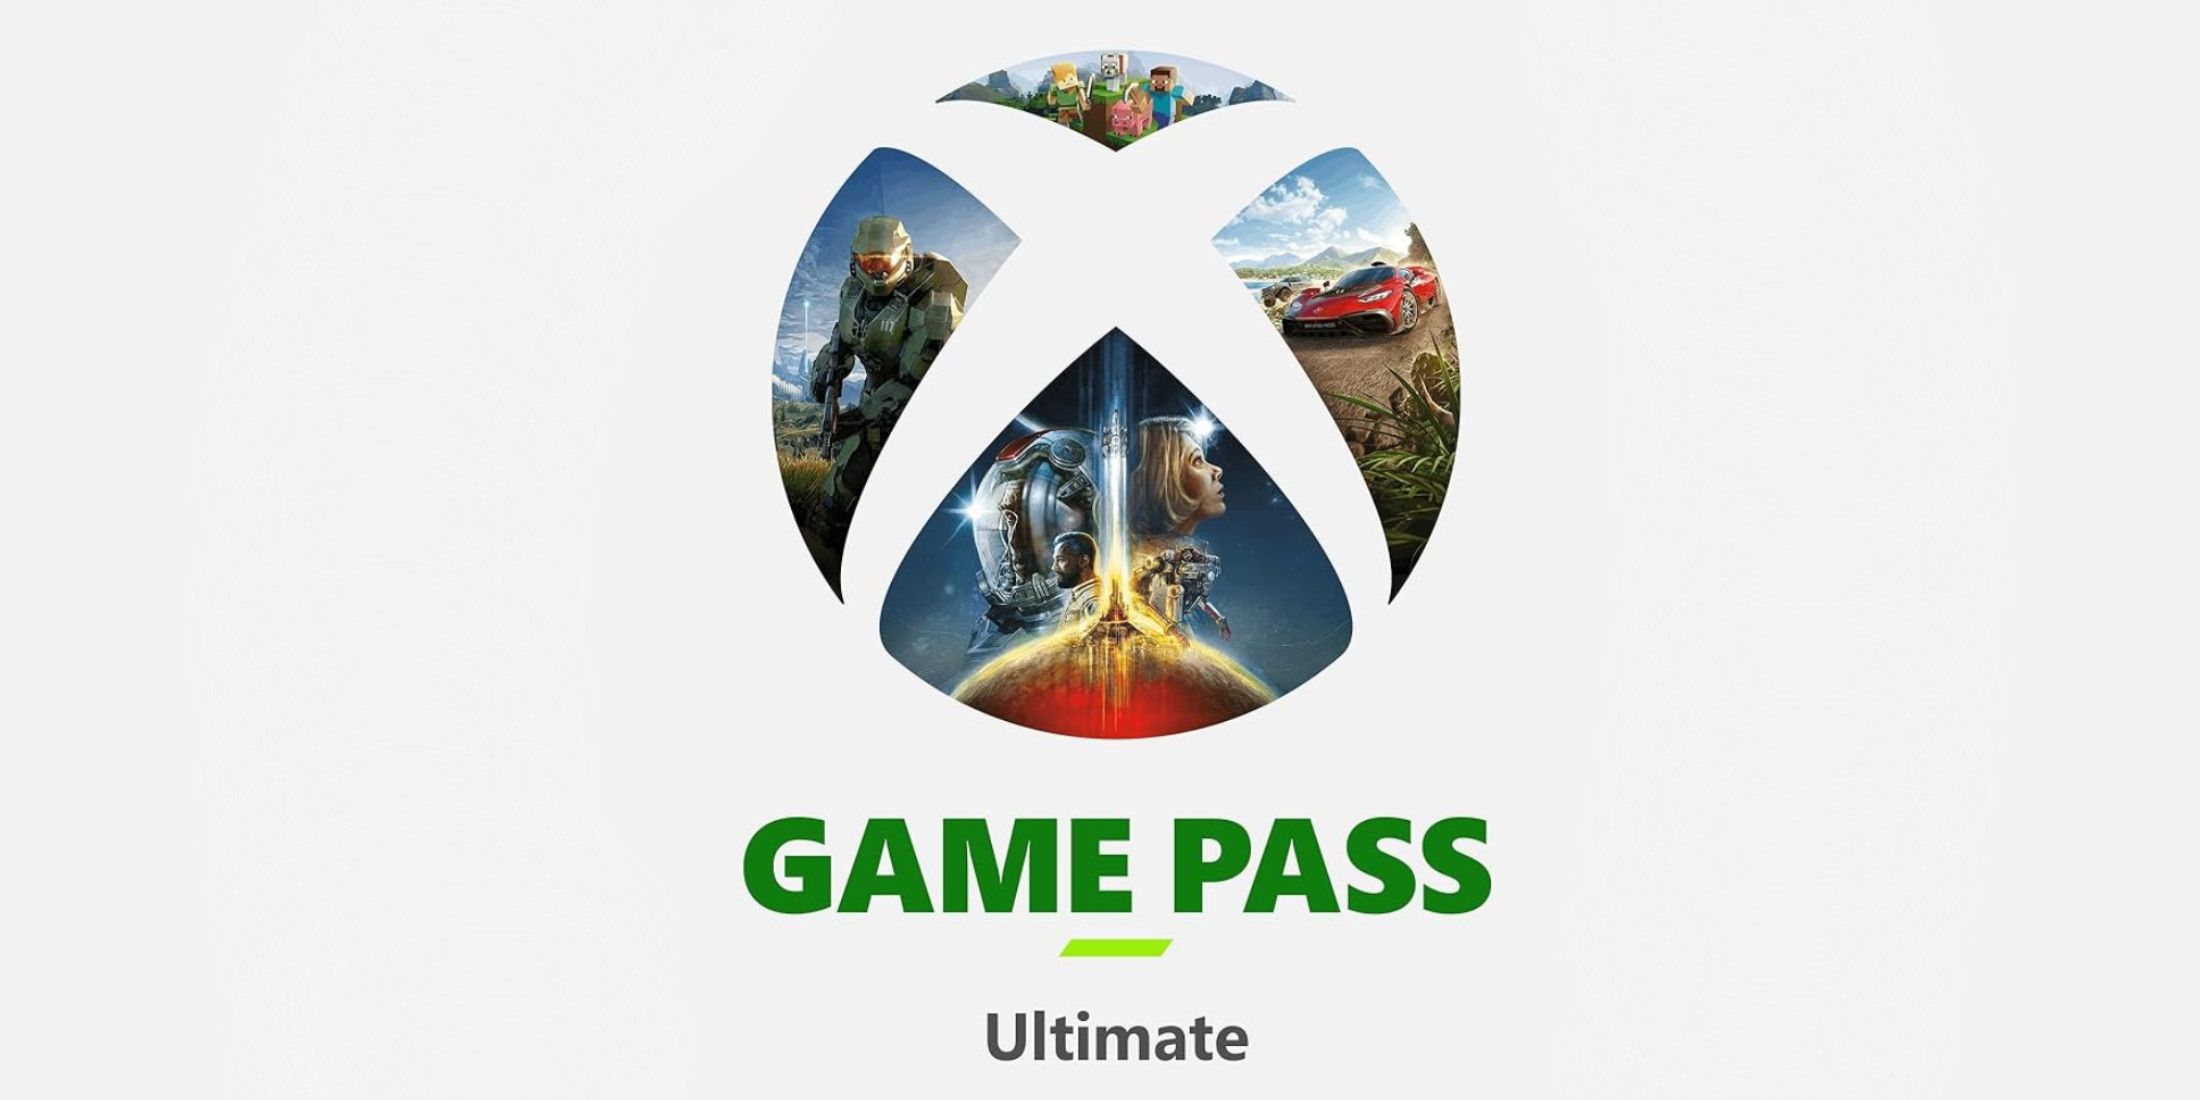 xbox game pass ultimate logo